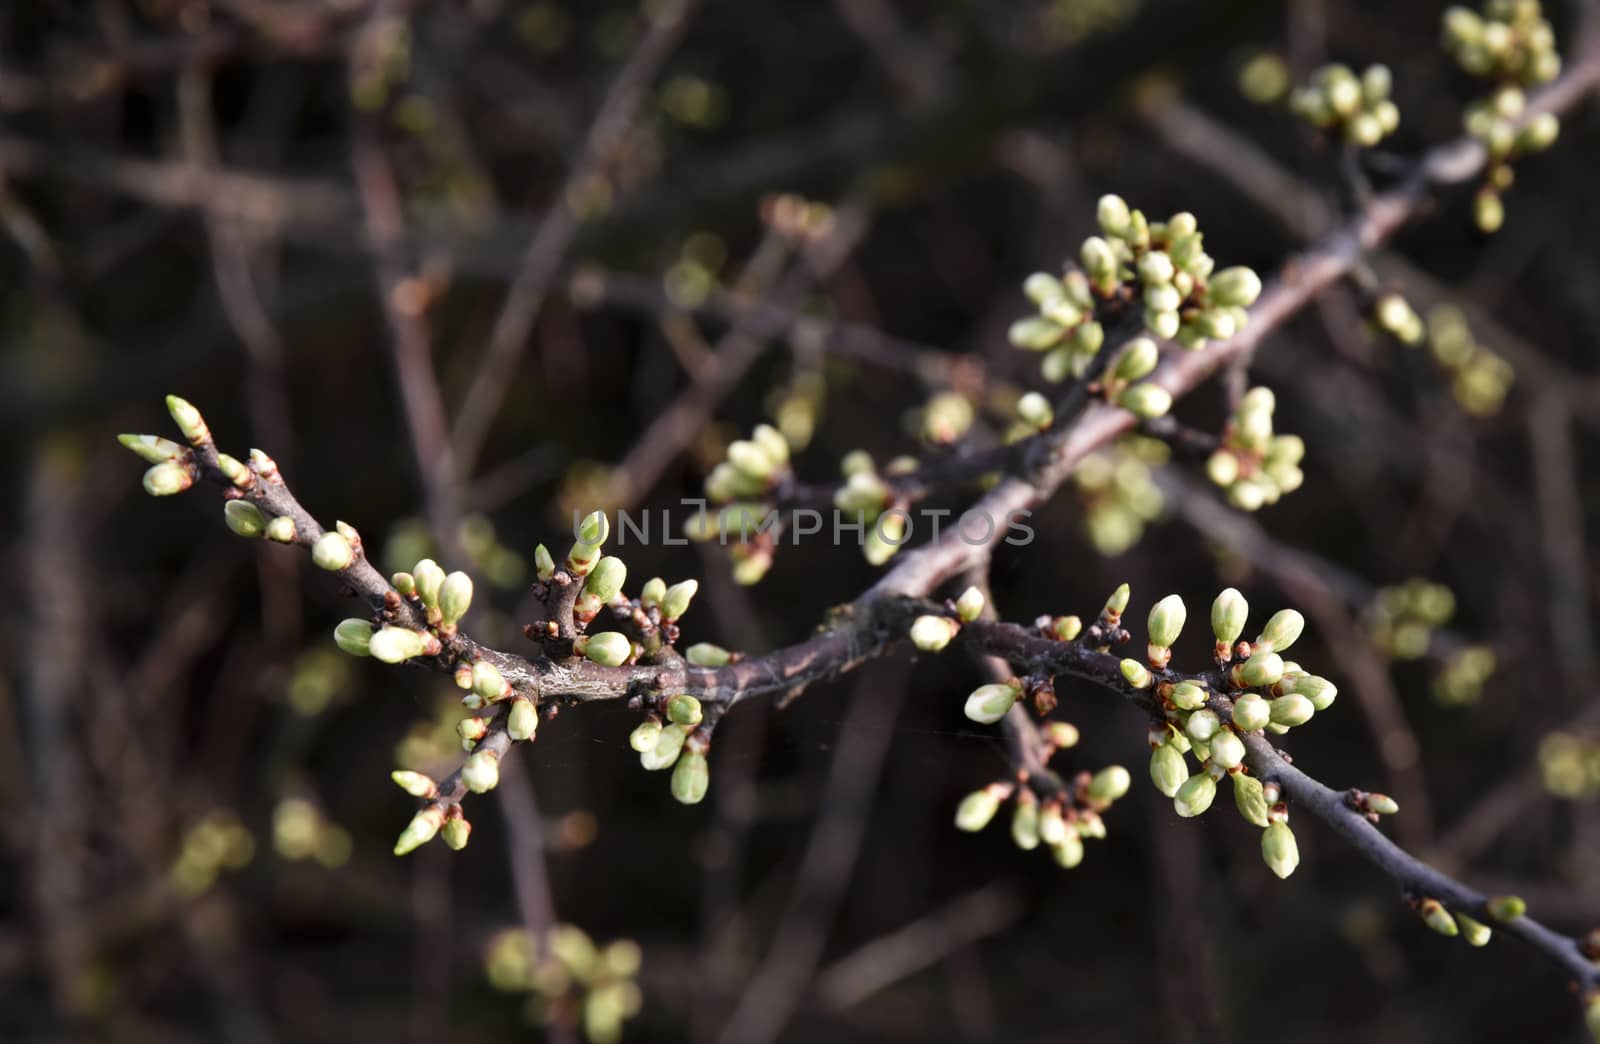 nature seasonal background Spring blackthorn branches with buds